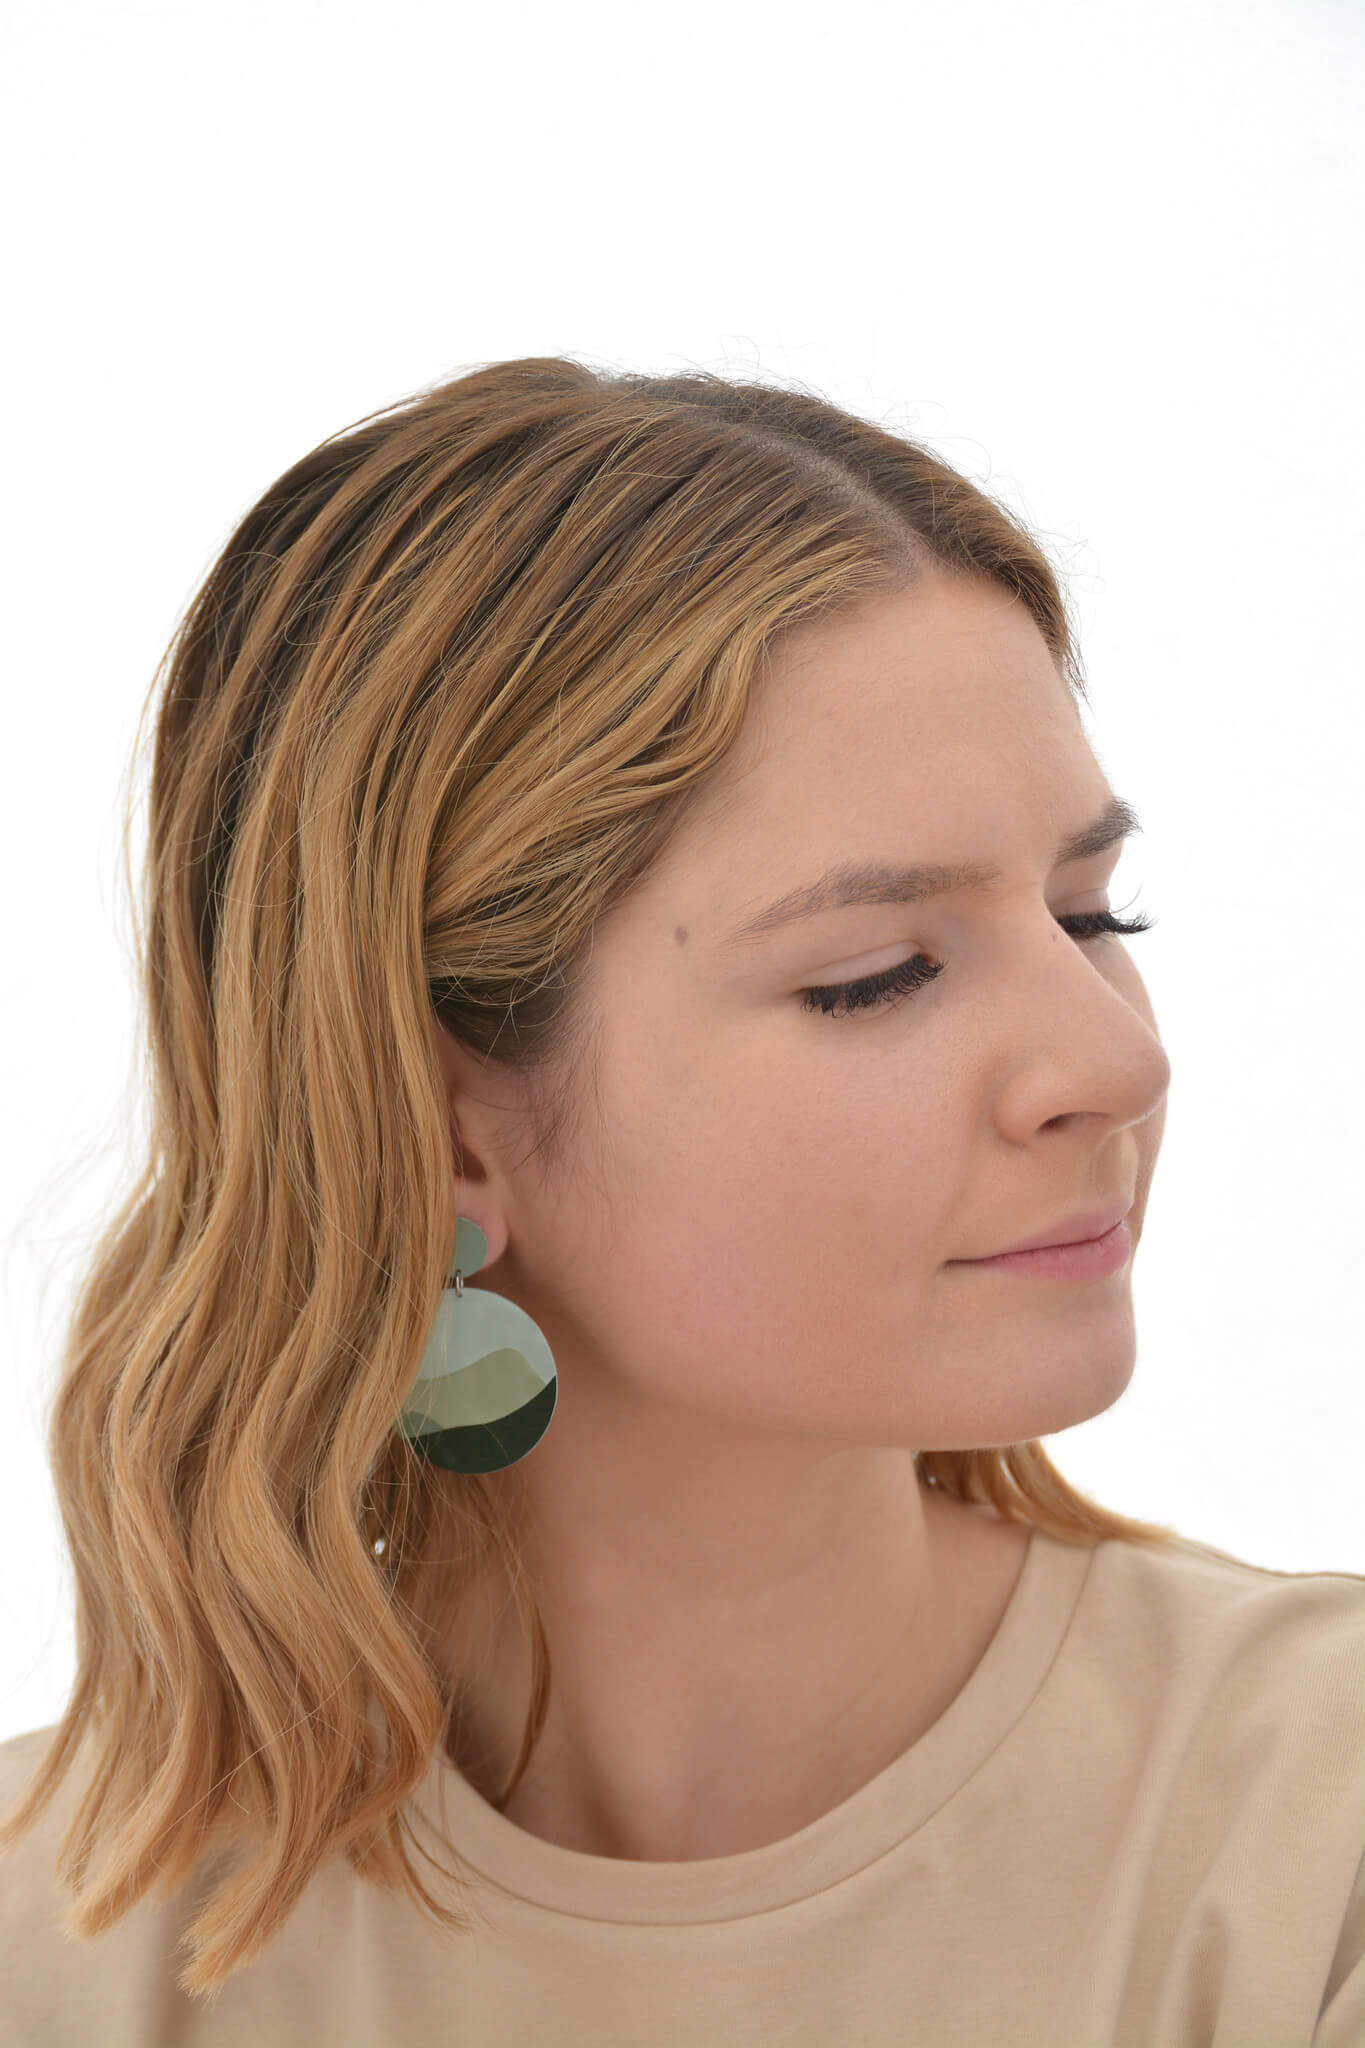 This is an image of a woman wearing a Kitty Came Home drop stud earring in her right ear. The top circle is 12 millimetres in diameter and the dangle circle is 36 millimetres in diameter. The design is called moondance by Satin and Tat. Darker green shapes form a landscape of rolling hills beneath of pale green night sky.